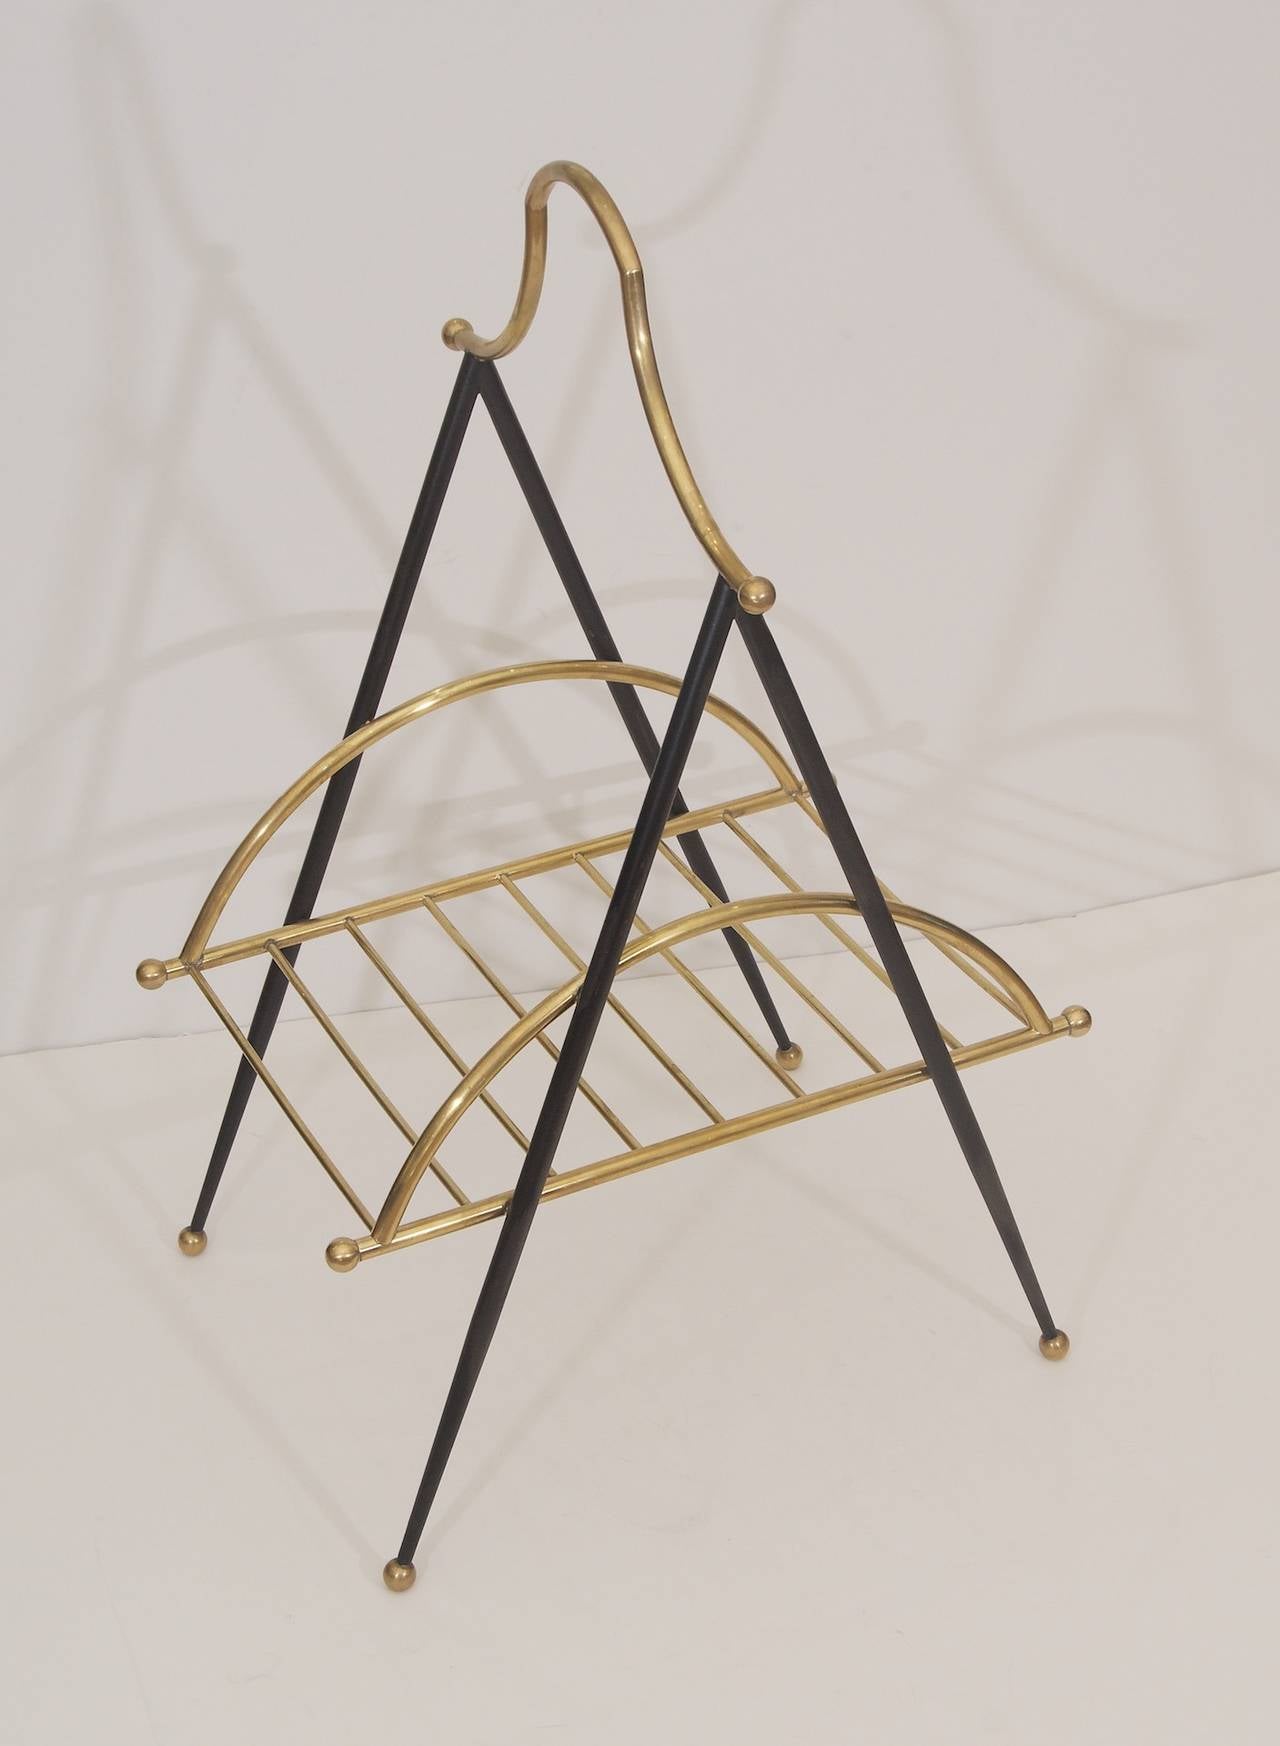 An elegant and eclectic magazine rack made with brass and black metal boosts linear and arced lines. This fantastic piece could also be put to use as a towel rack in a bathroom as an alternative.